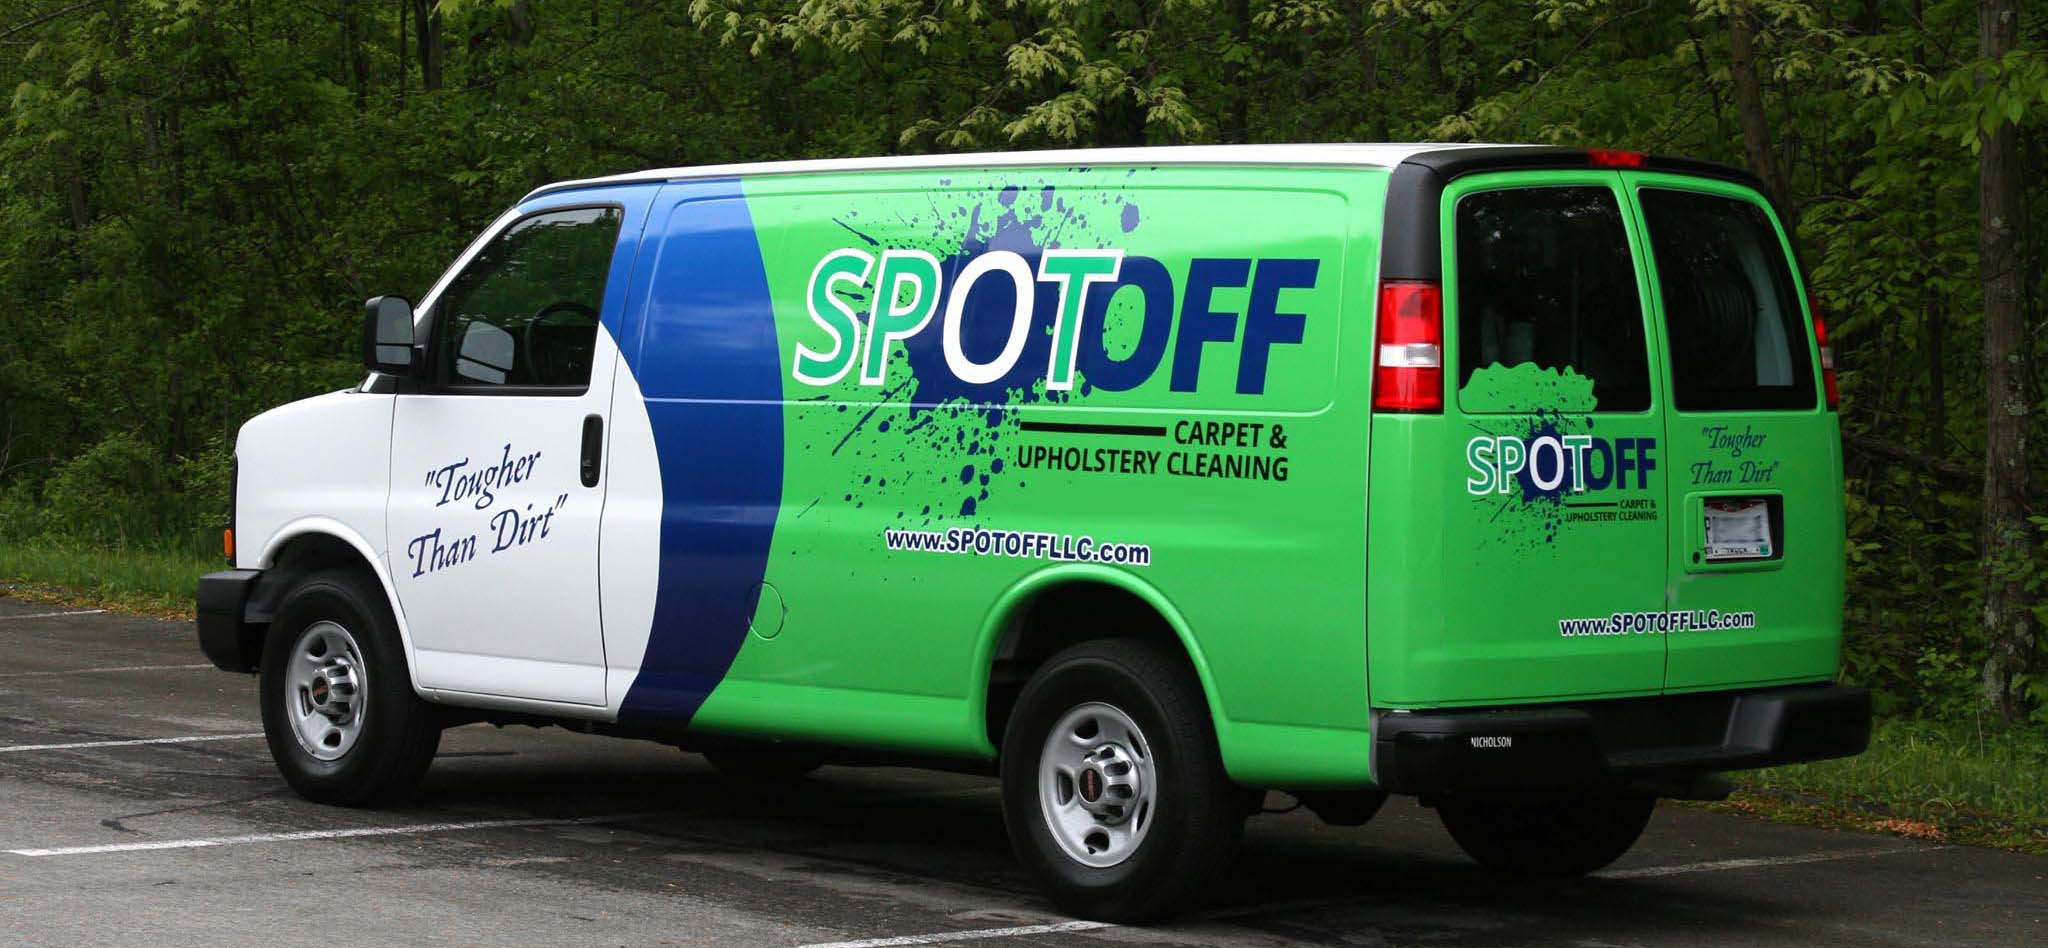 SpotOFF Carpet and Upholstery Cleaners van